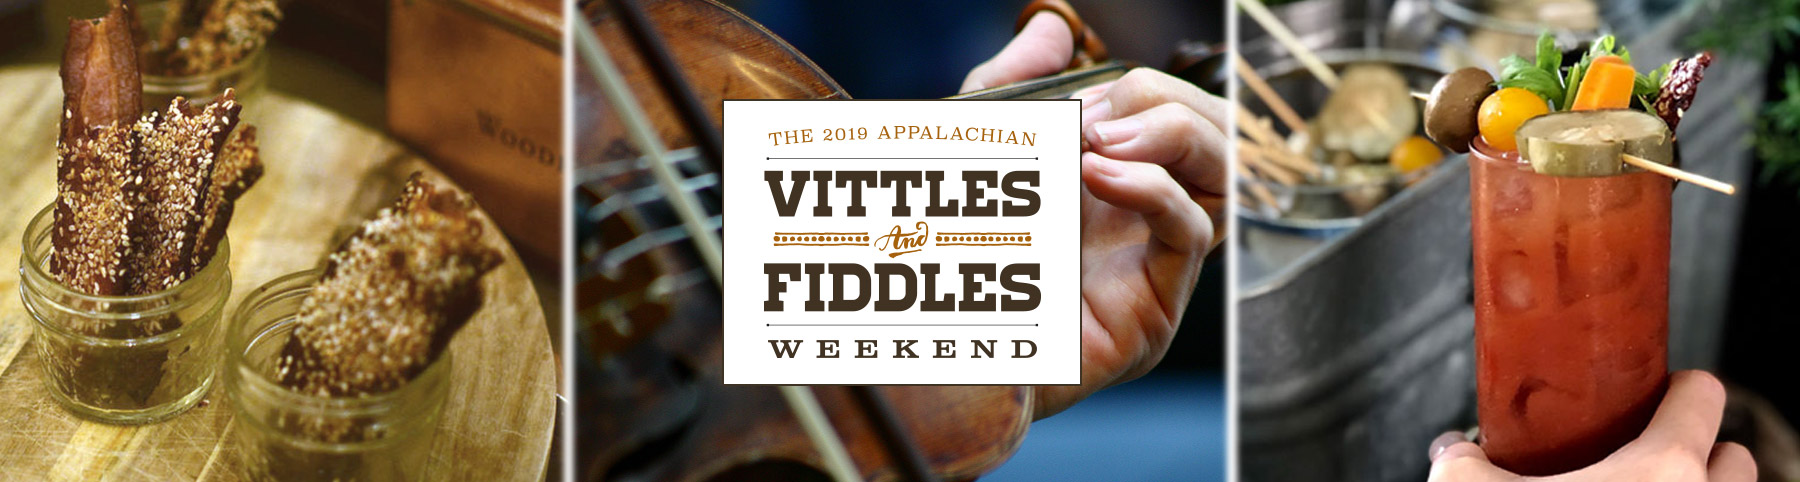 Vittles and Fiddles Weekend